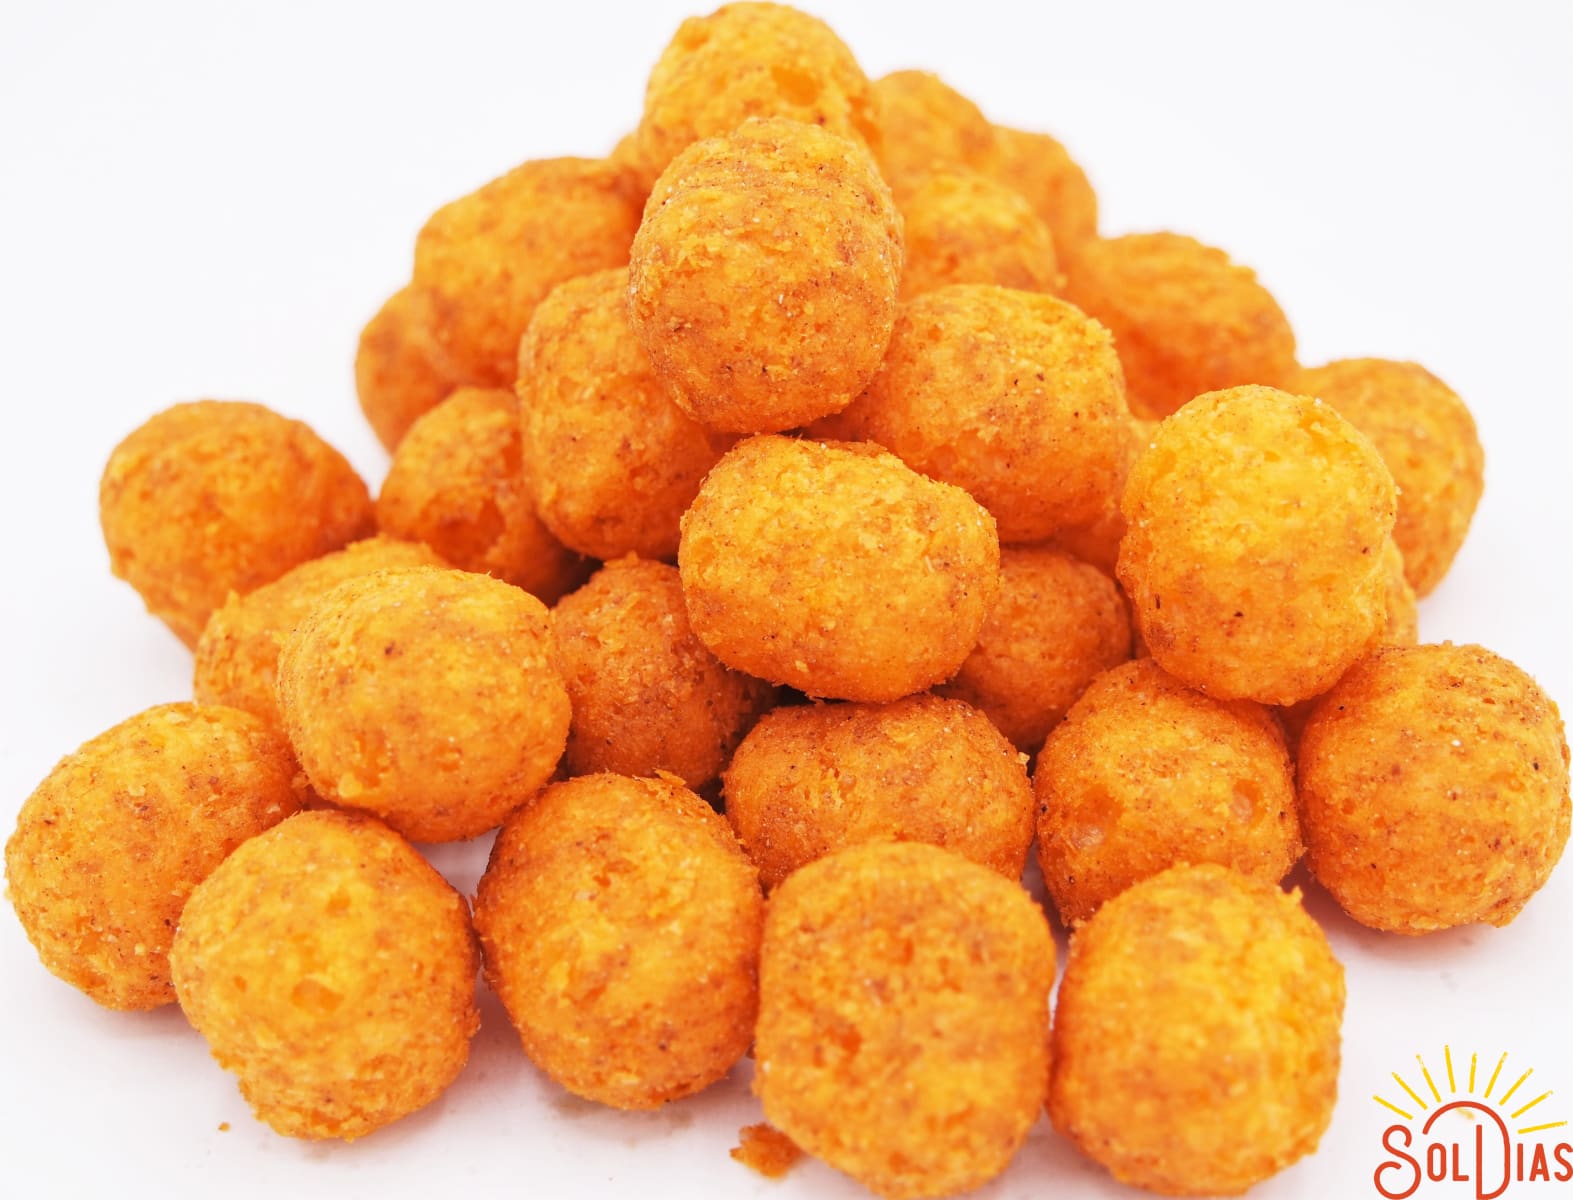 Cheetos Bolitas United States Official Debut